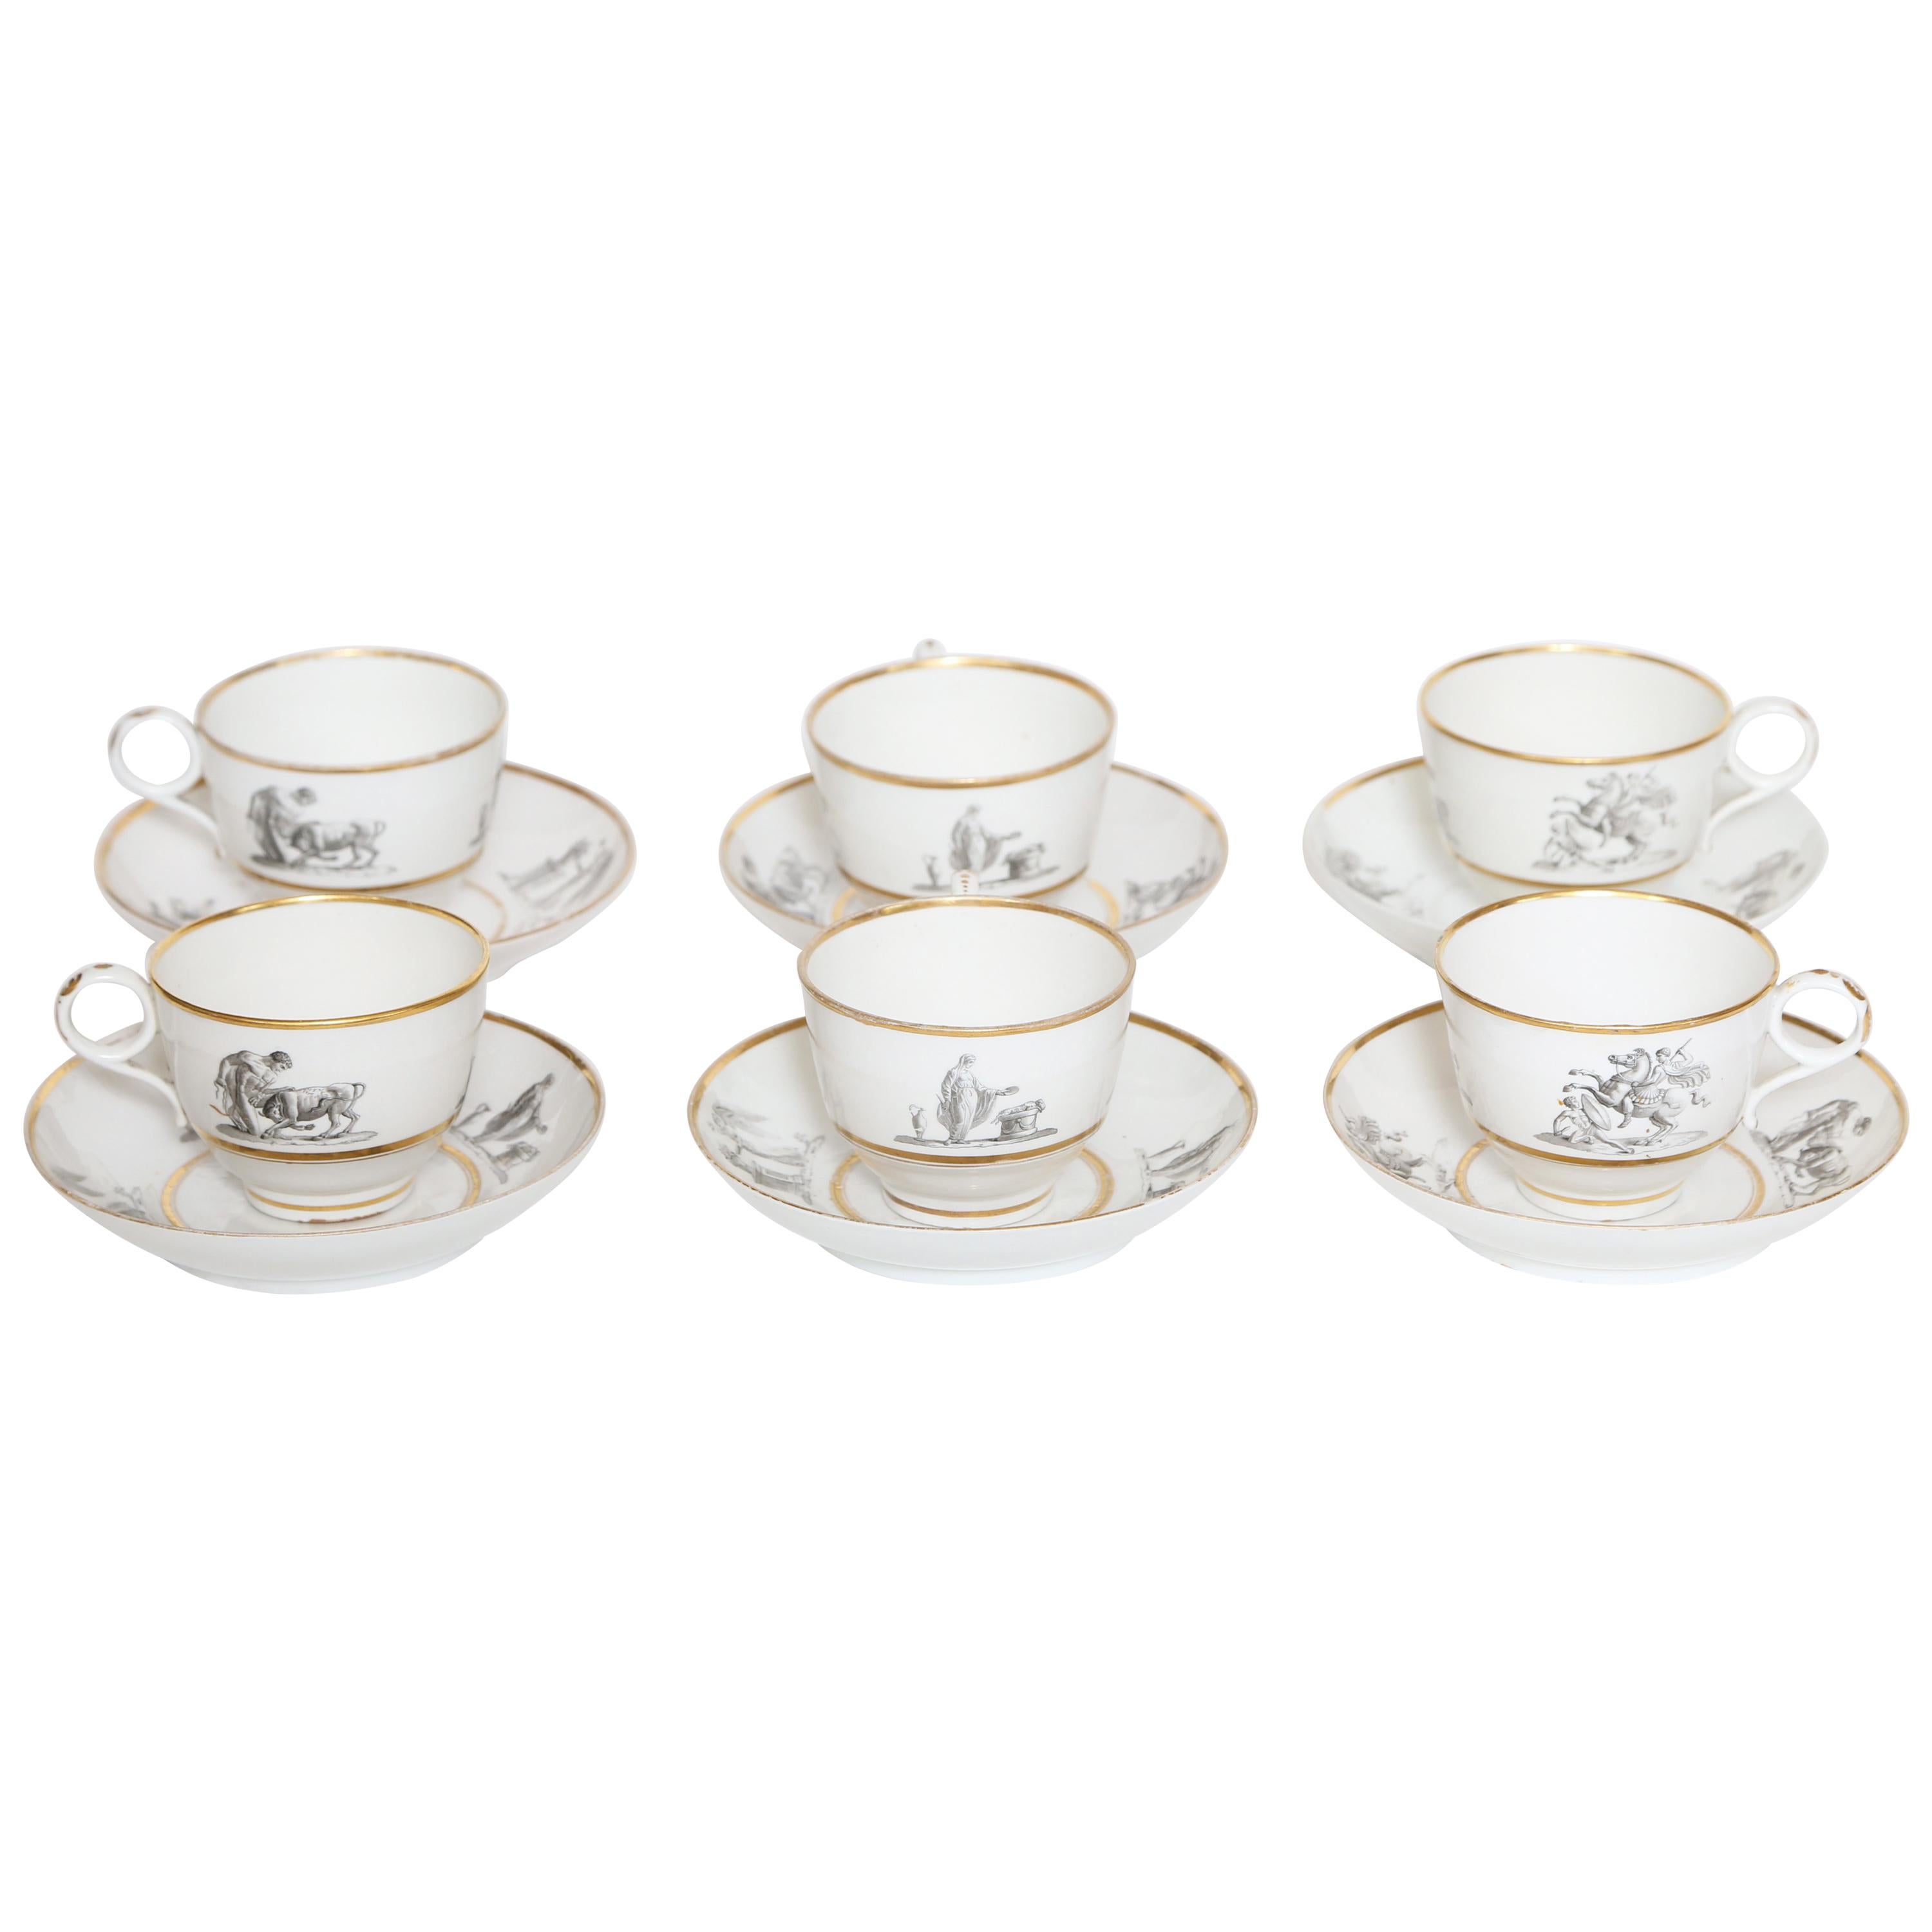 Set of Six Porcelain Cups and Saucers by Flight, Barr & Barr Worcester 